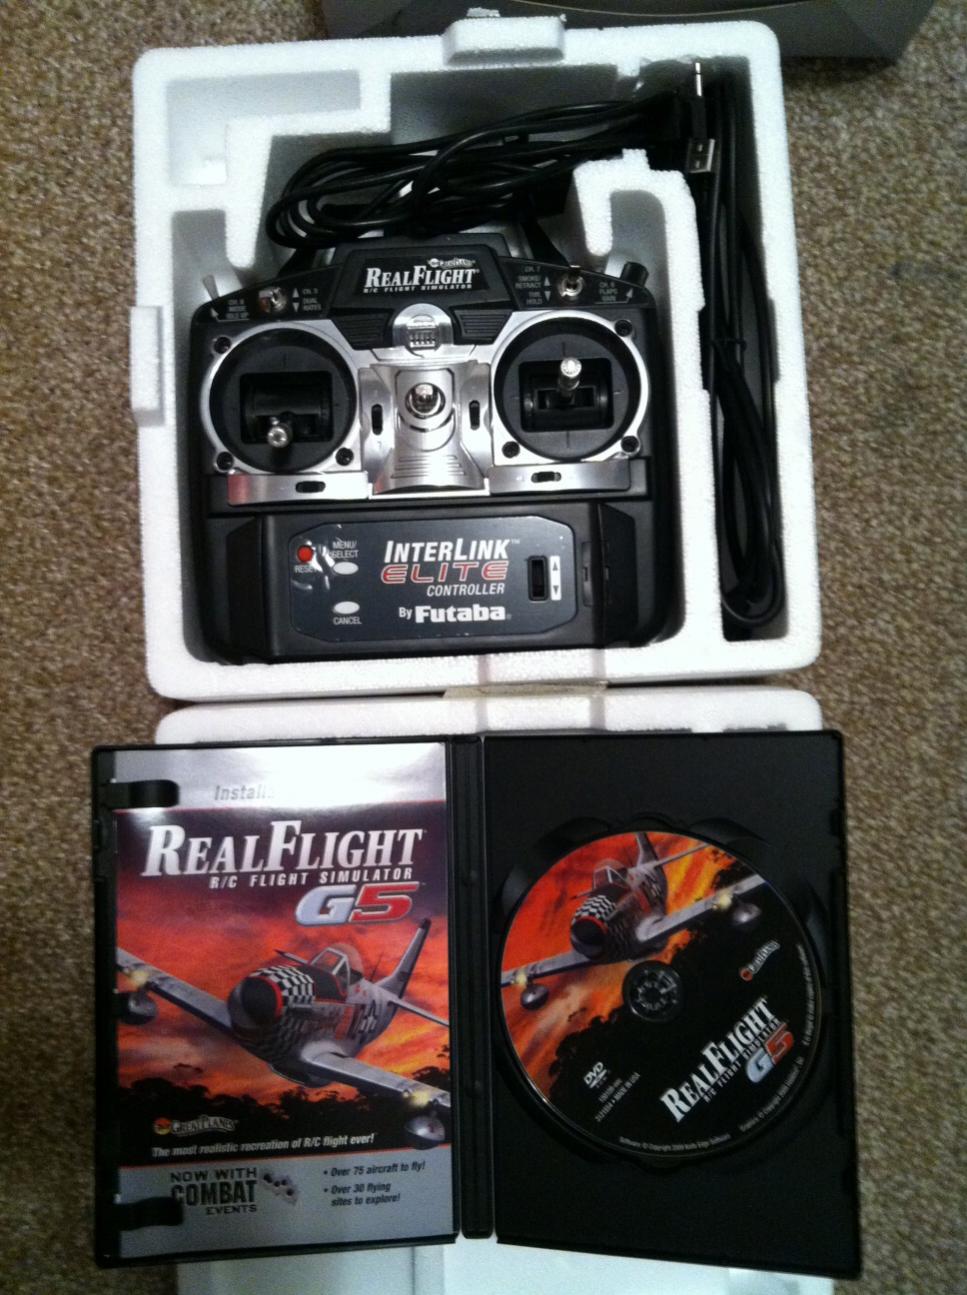 realflight 7 expansion pack